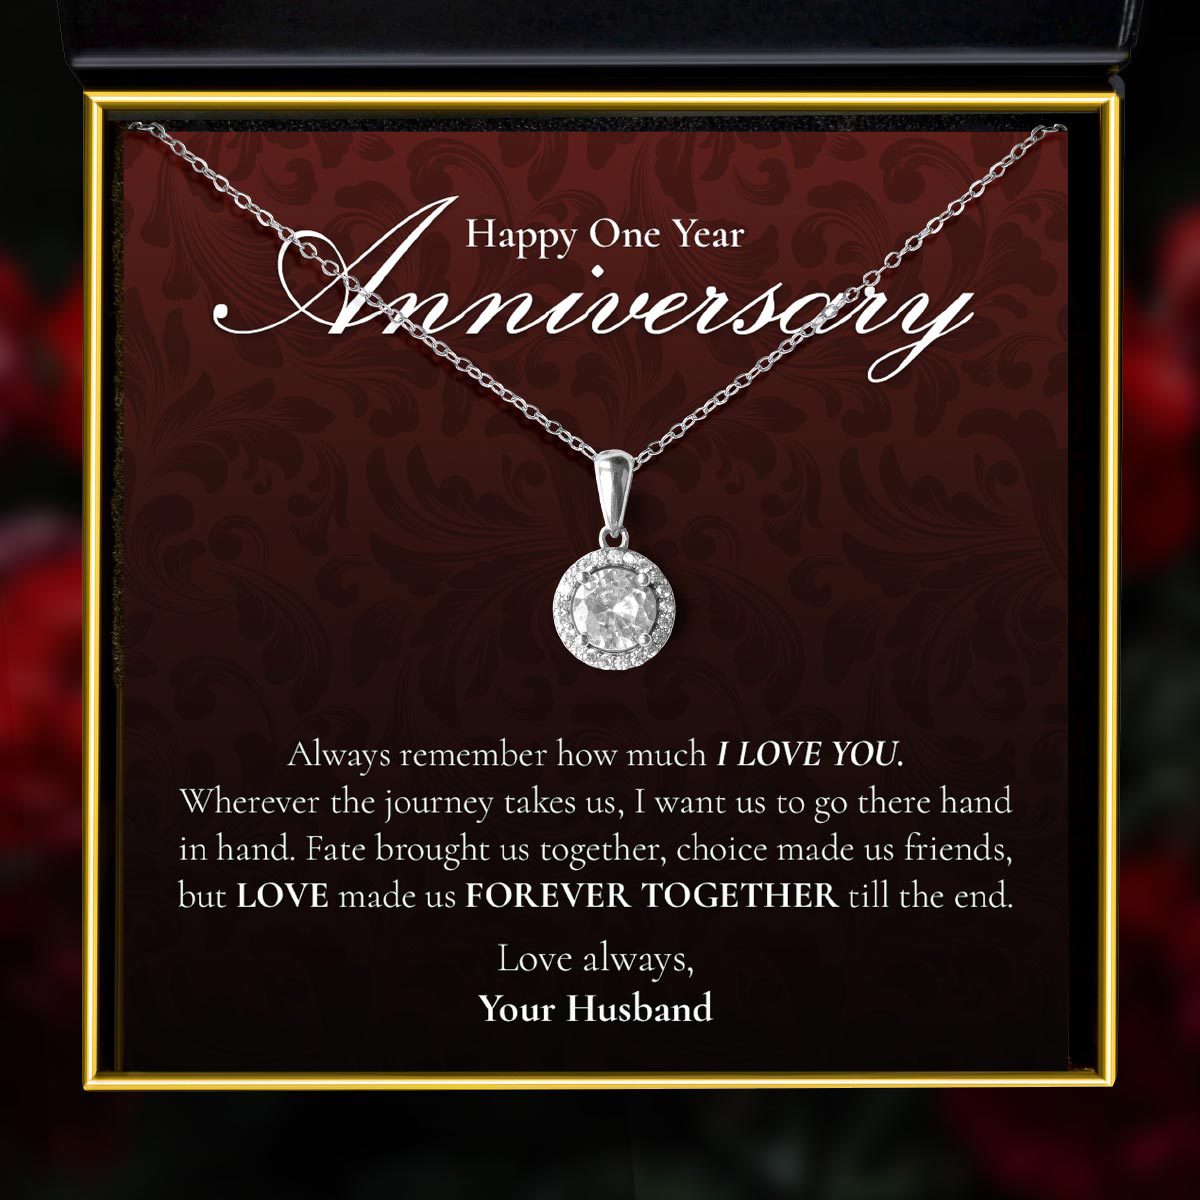 Happy One Year Anniversary - Classique Sterling Silver Halo Pendant Necklace Gift Set